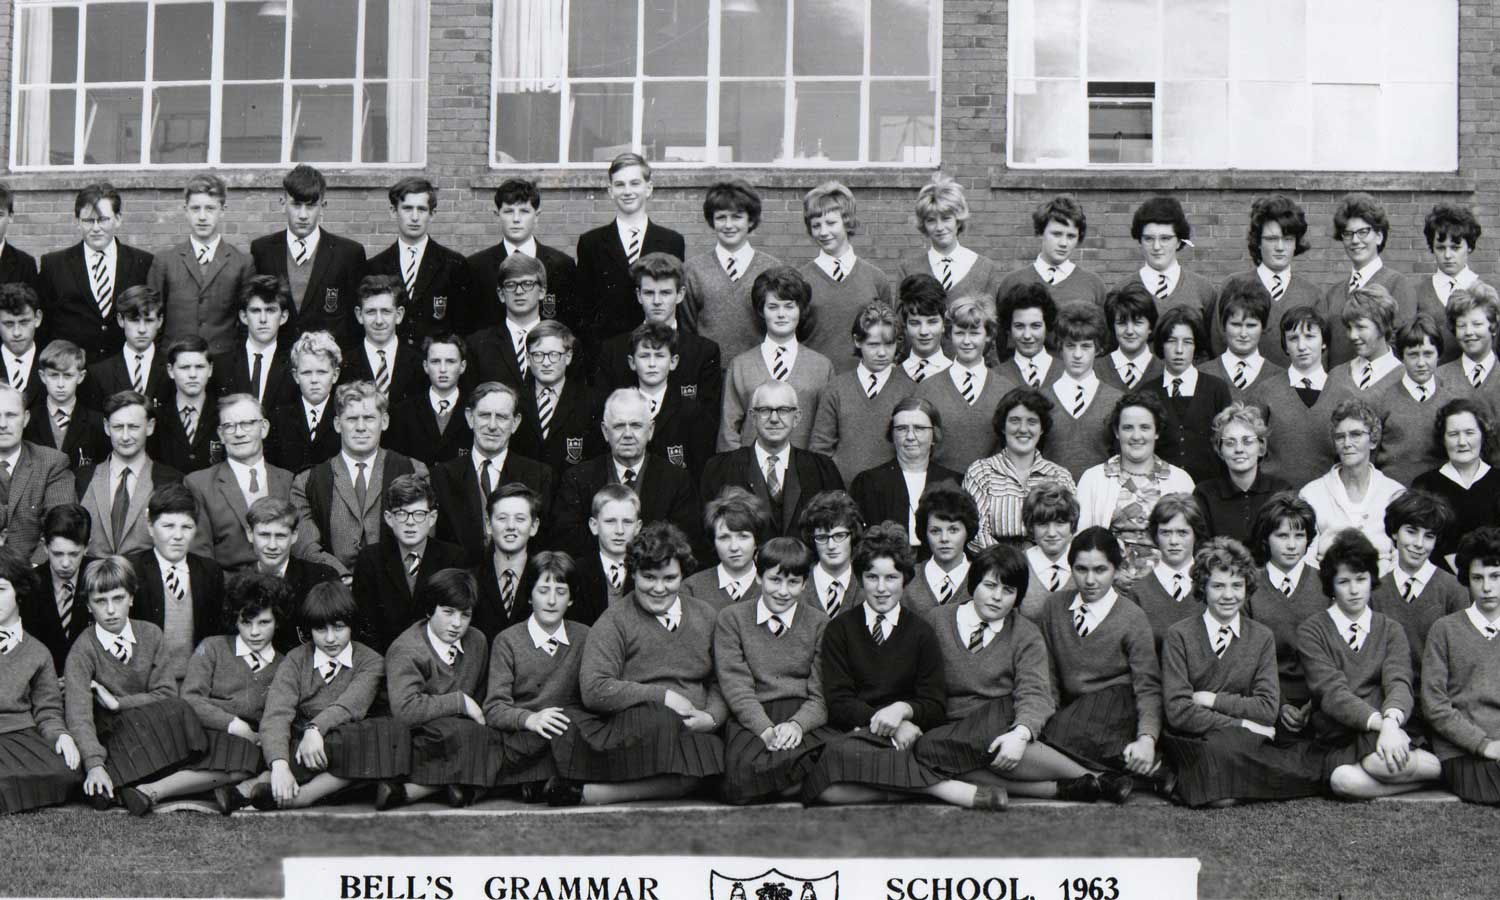 A photo of section1 of the Bells Grammar School photo from 1963- section 3